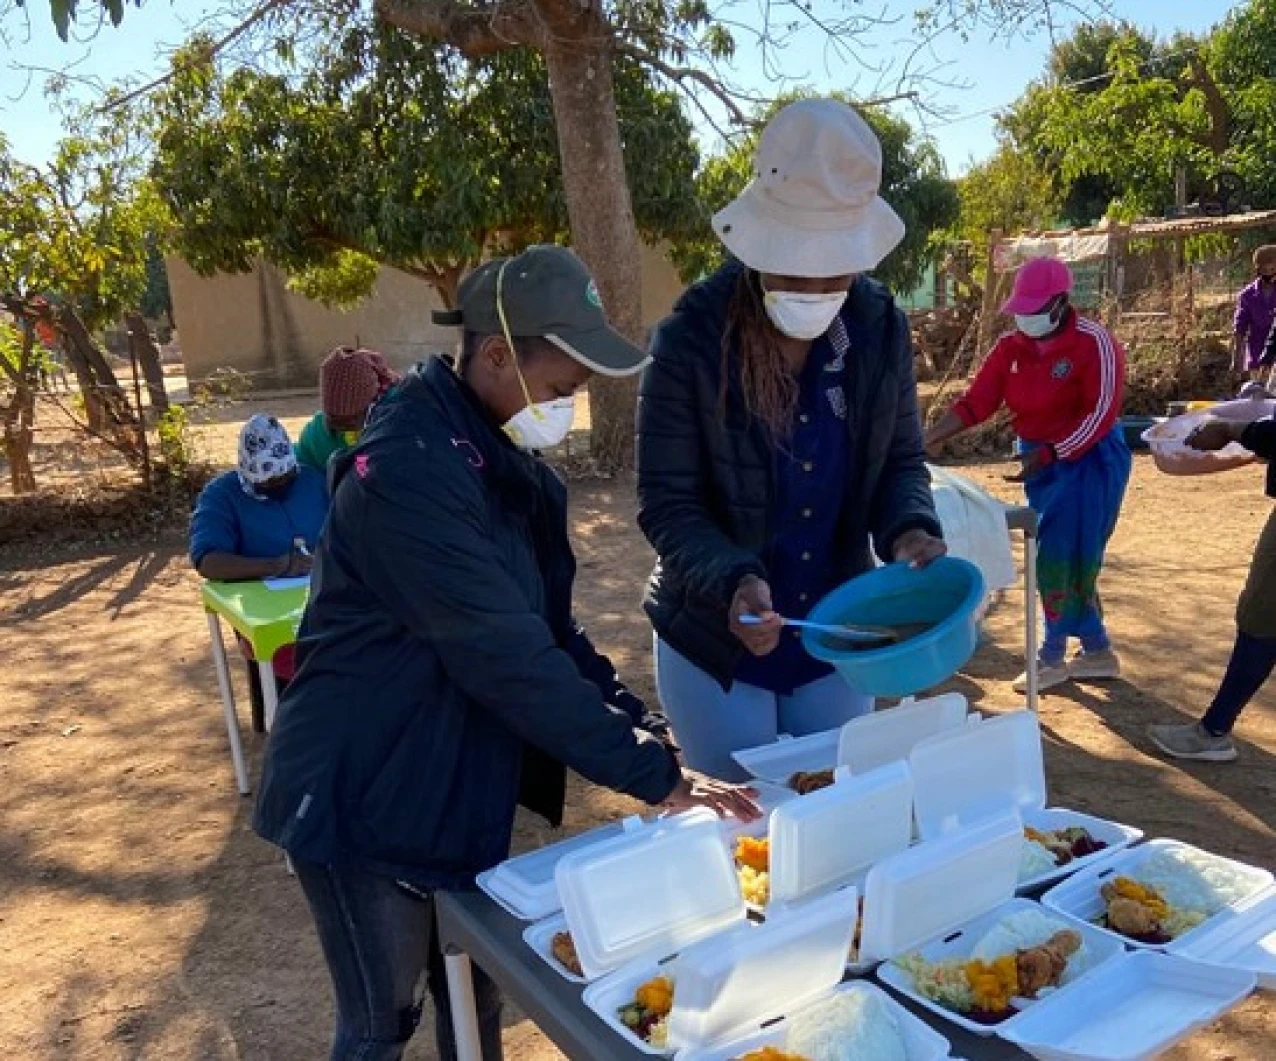 Lunch is served at Hlayisekani Stimulation Centre